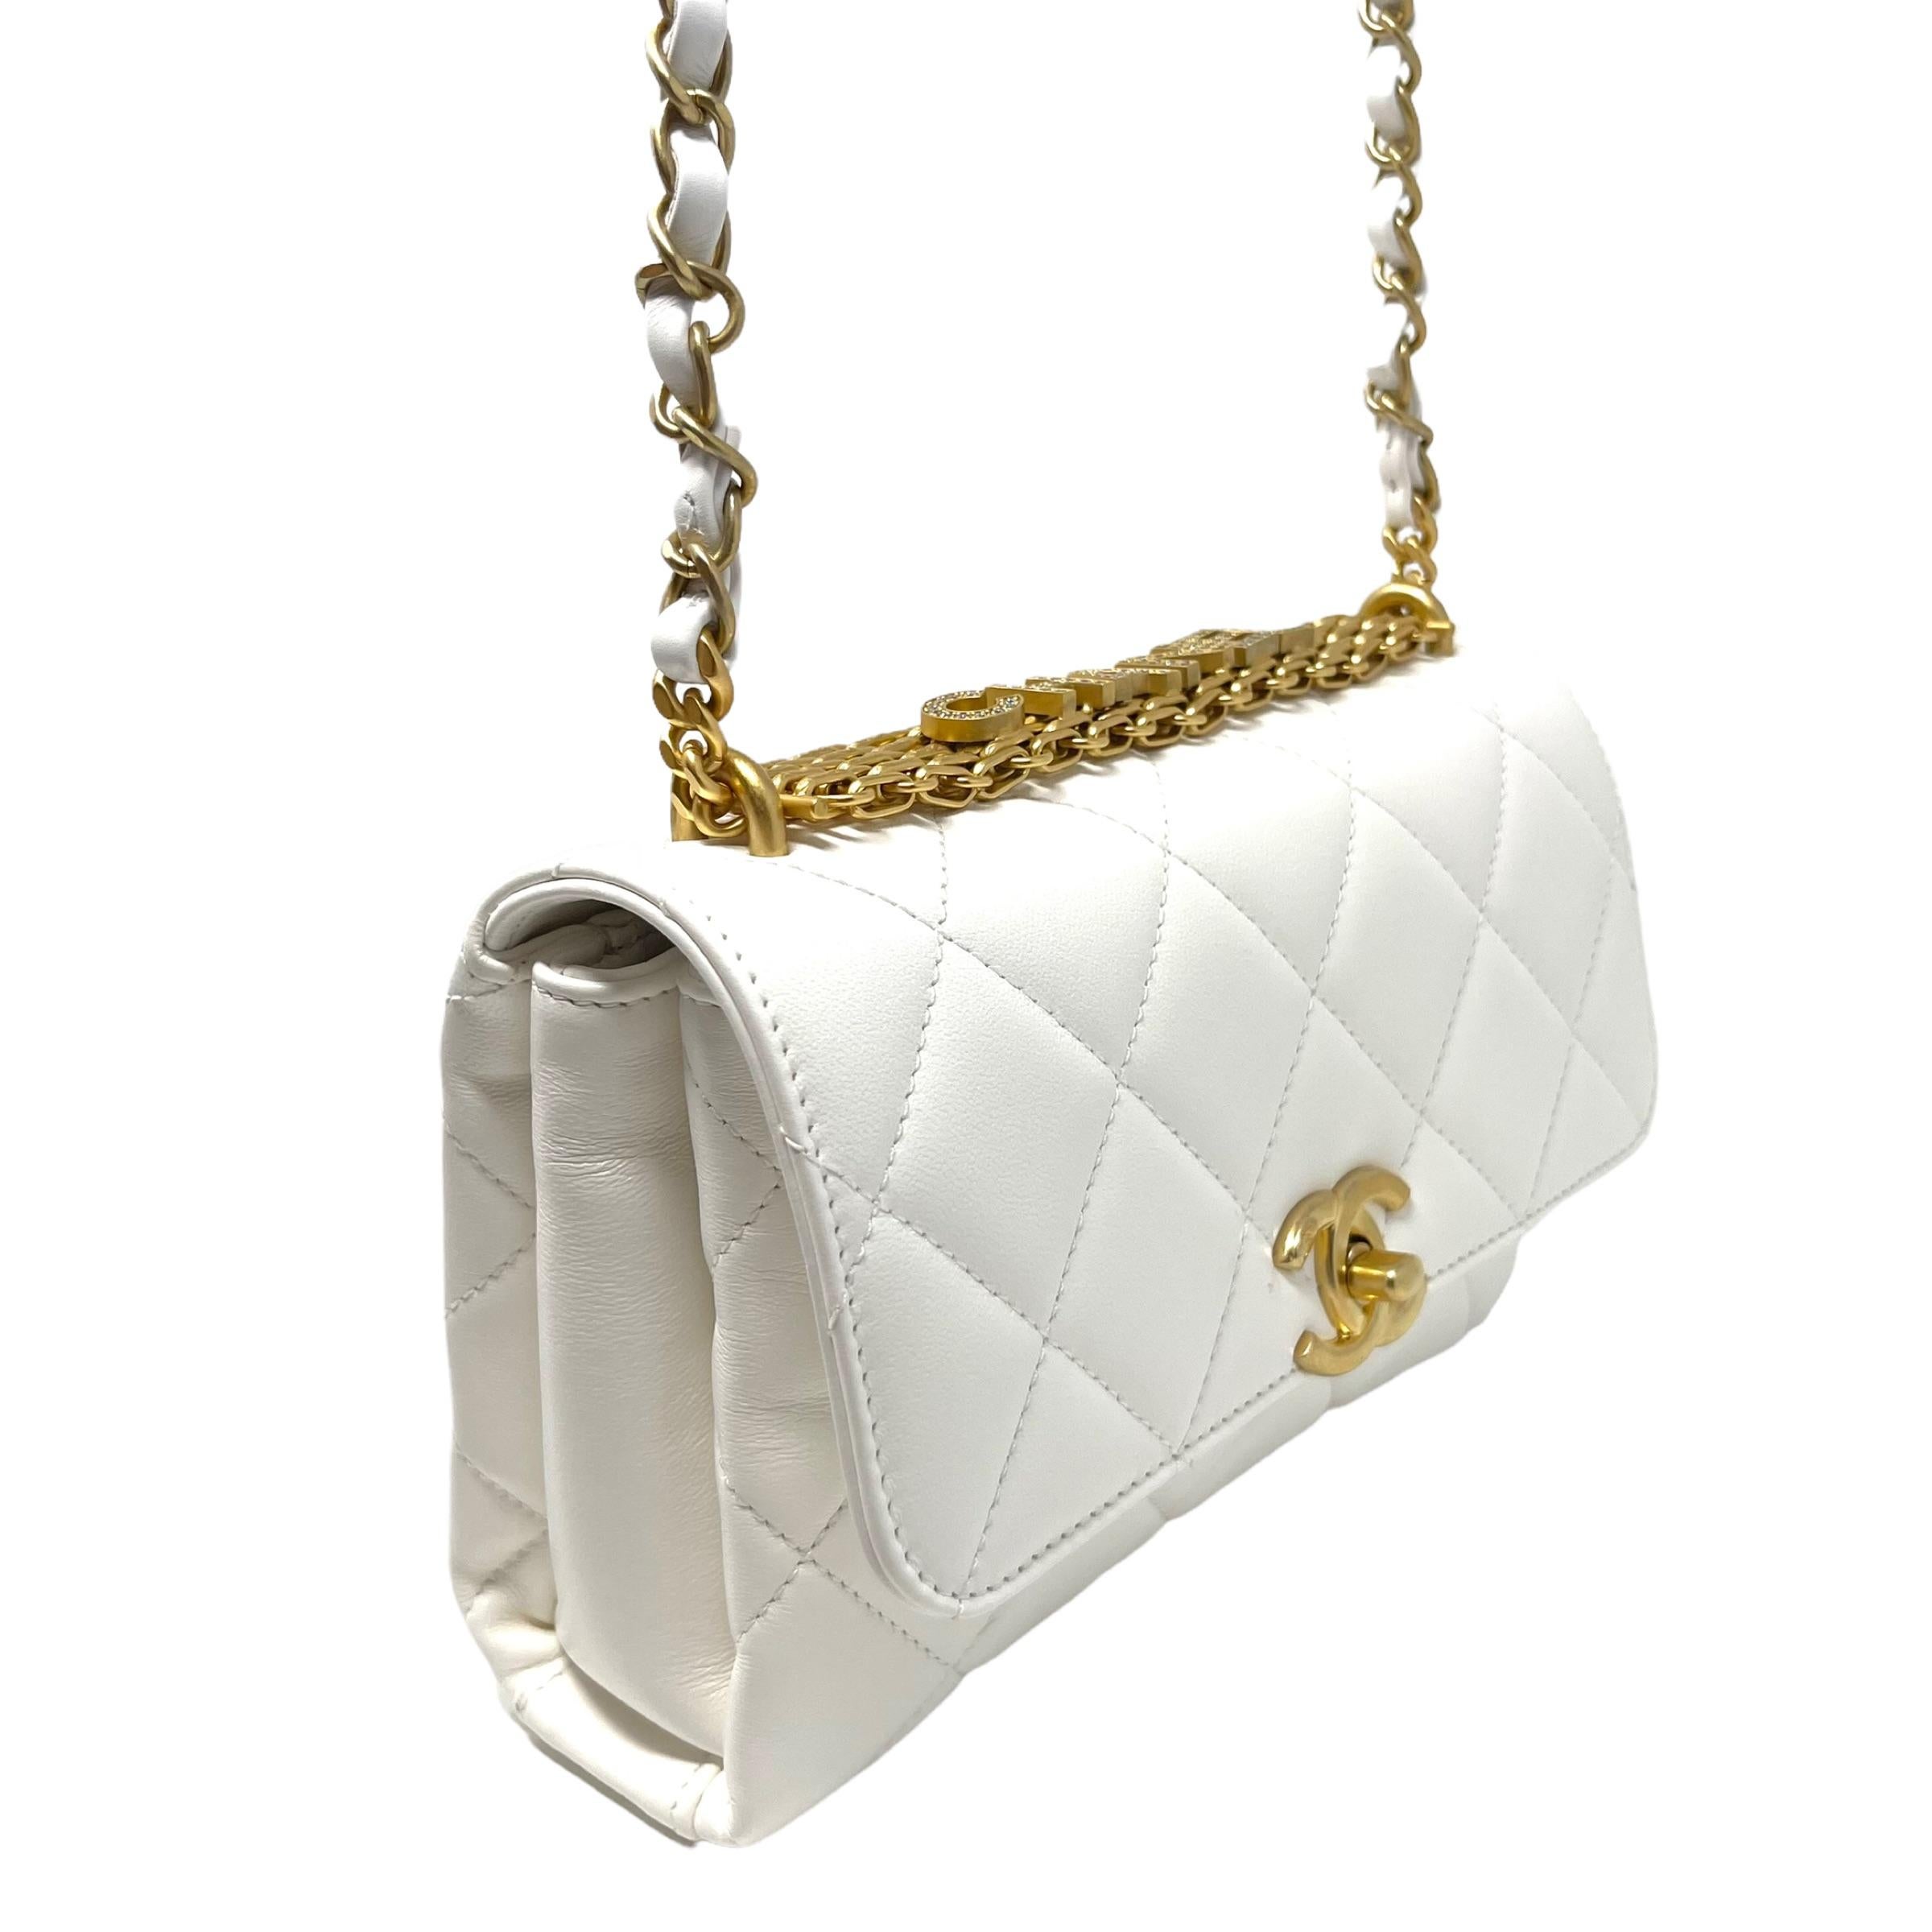 NEW Chanel White Small Flap Bag Quilted Leather Crossbody Bag For Sale 4